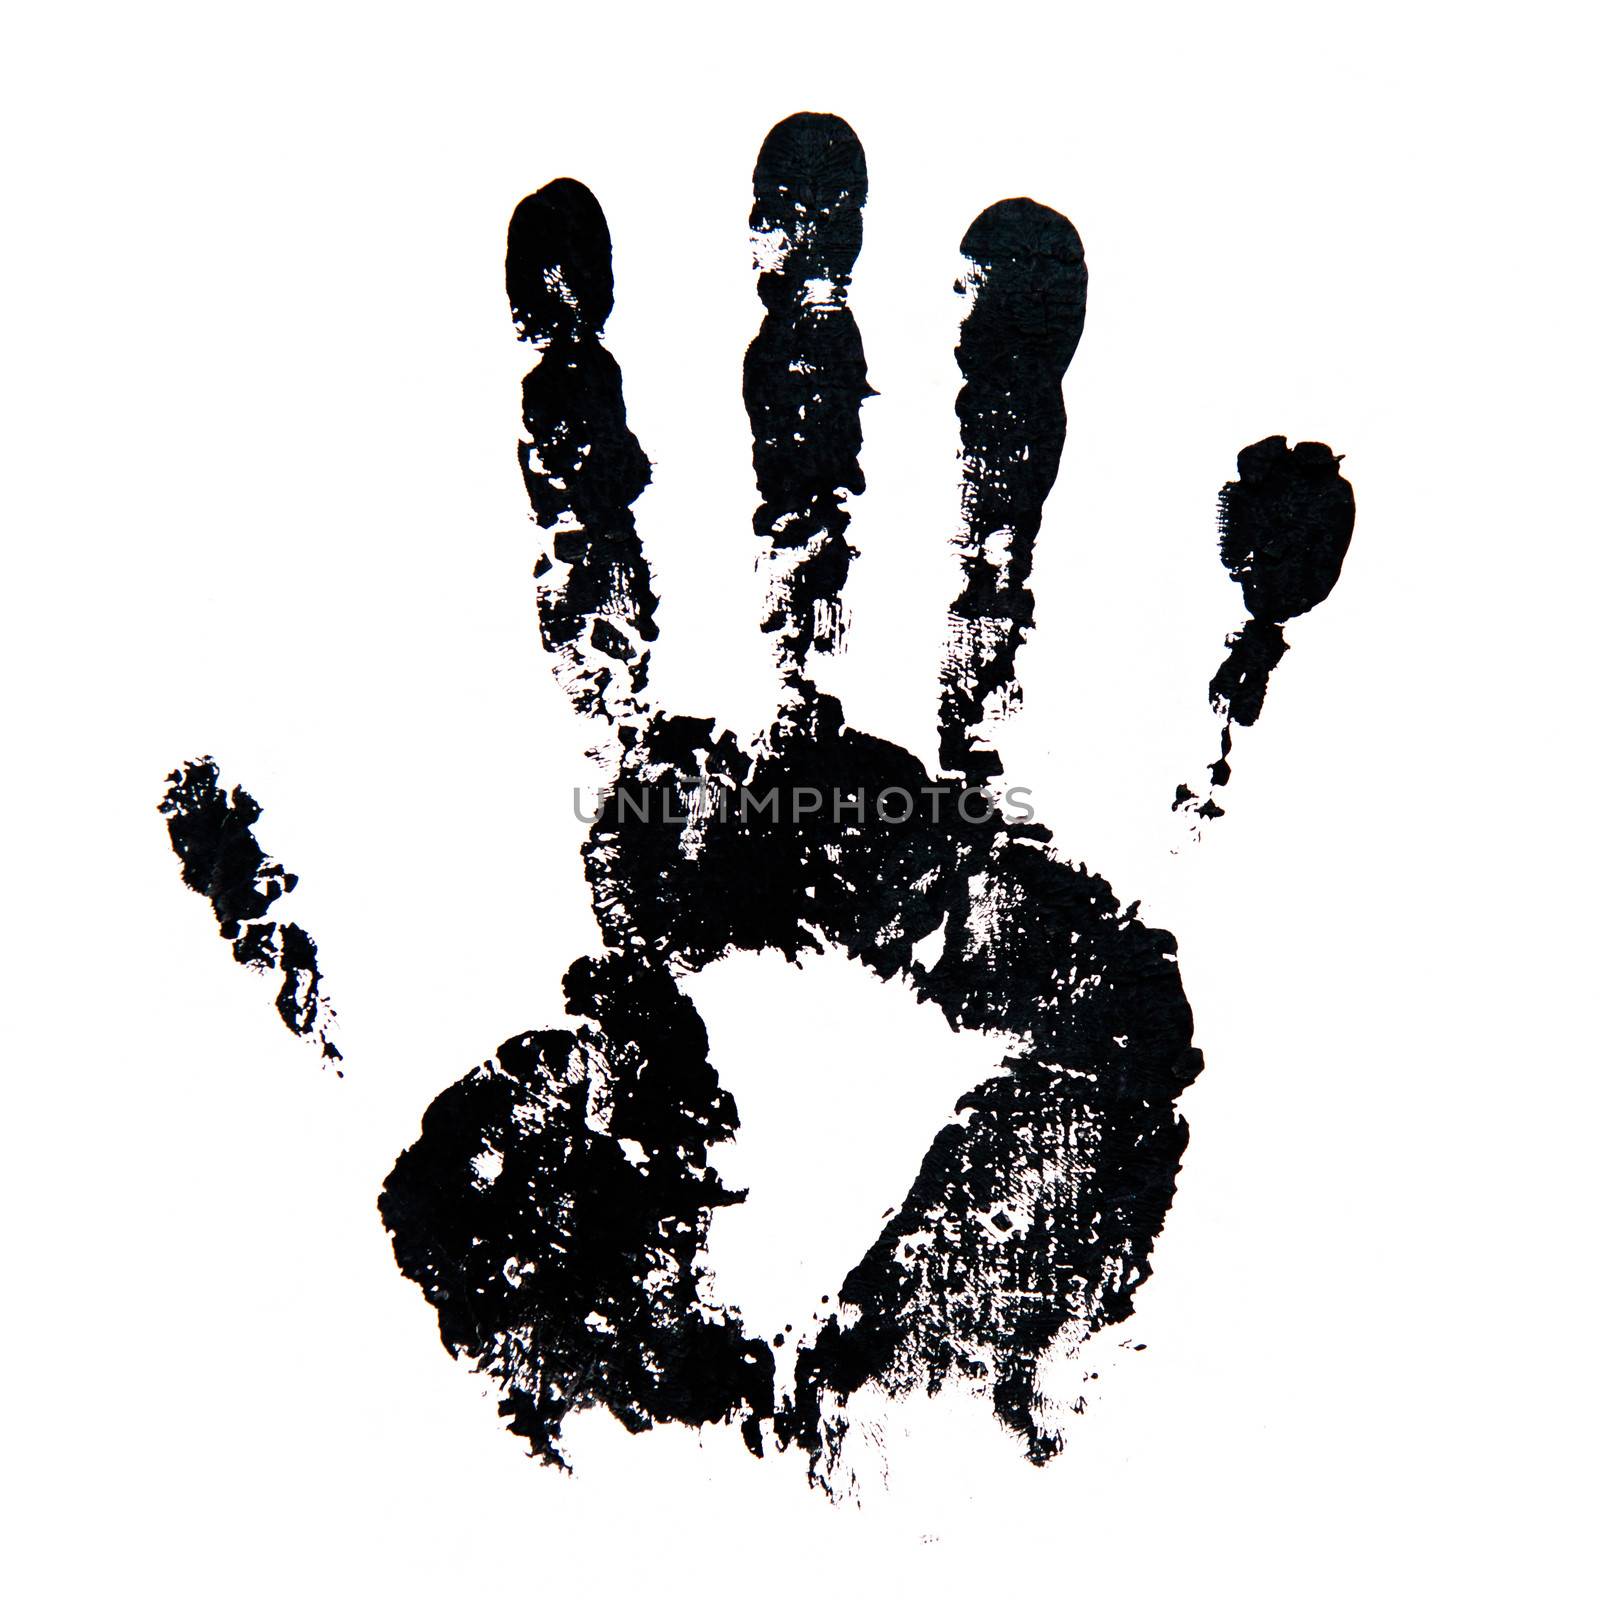 Black hand print on the white surface